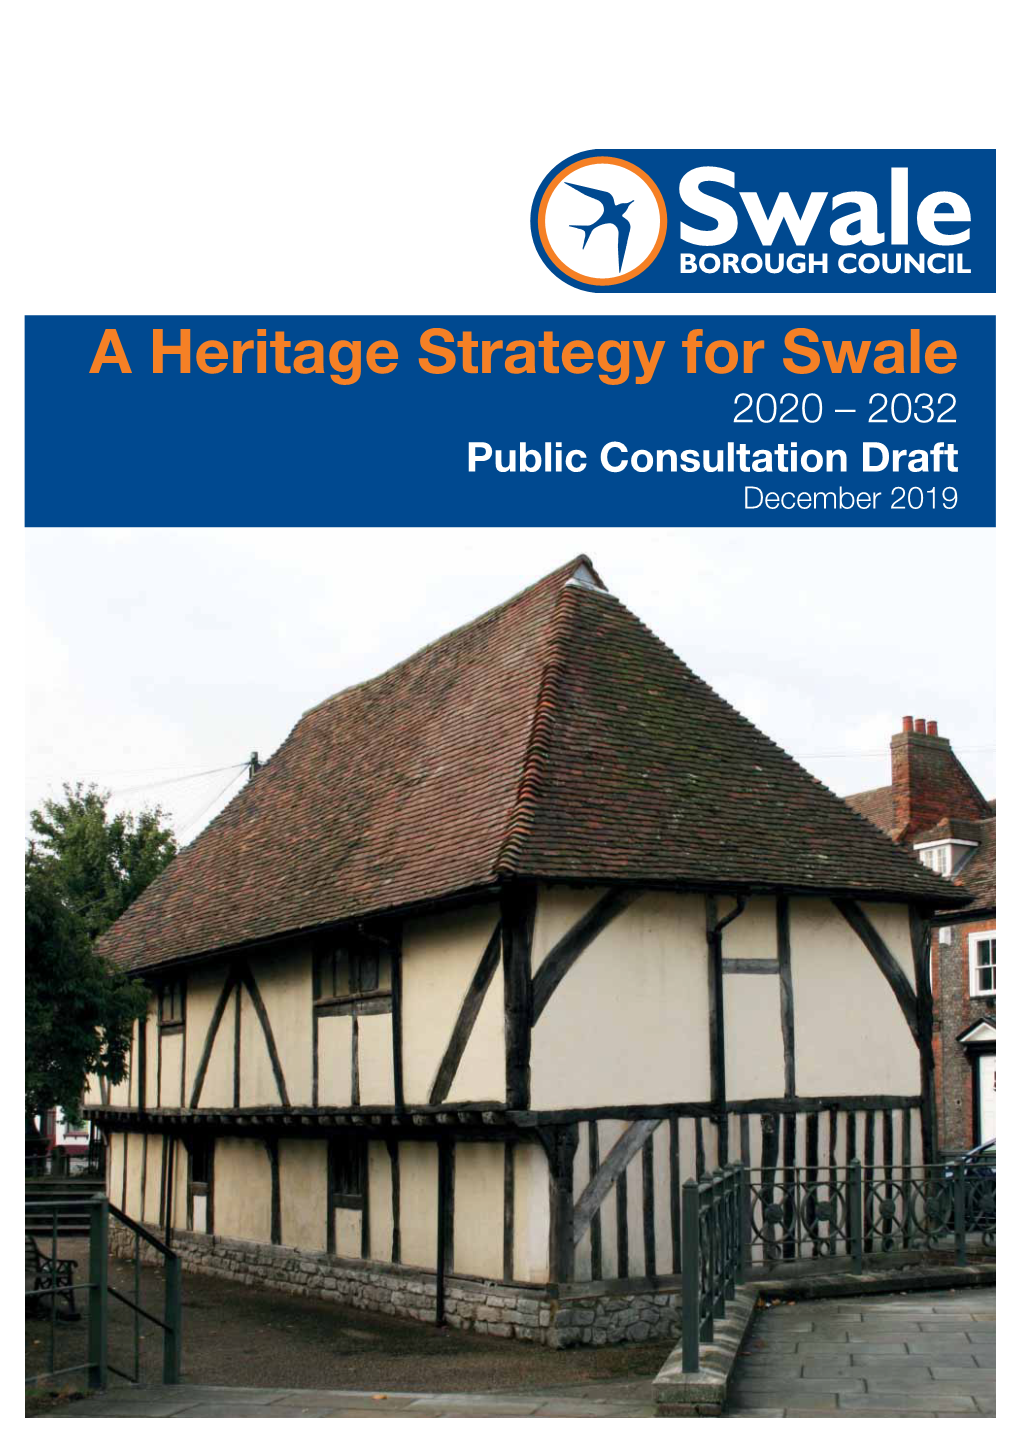 Why a Heritage Strategy?